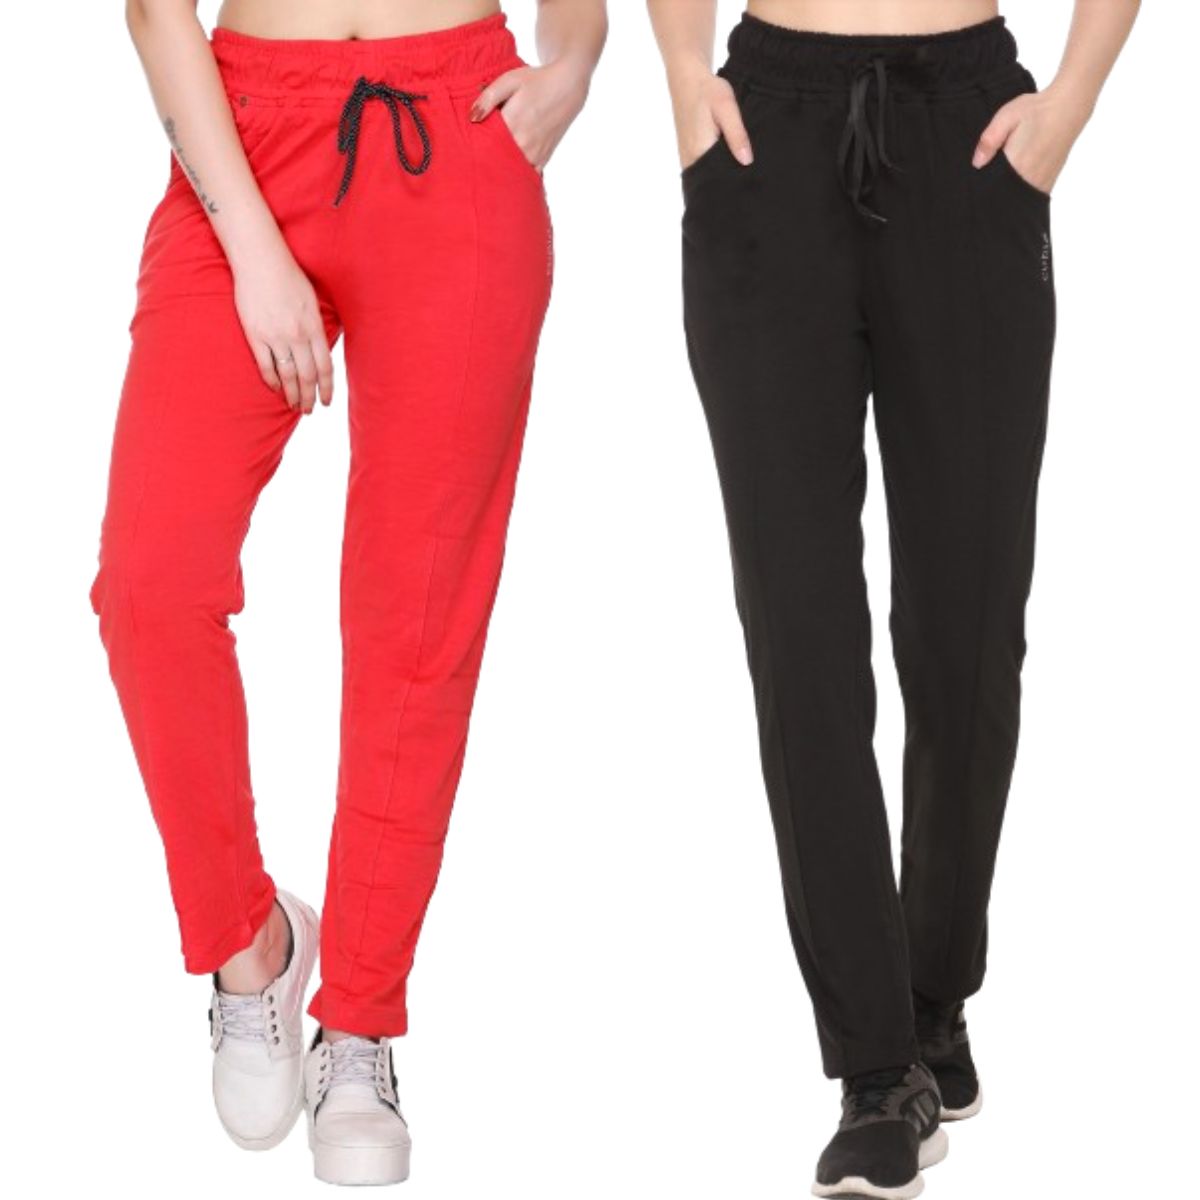 HINGE Womens Cotton Track Pant - Combo Pack of 3 Pcs (L) : Amazon.in:  Clothing & Accessories